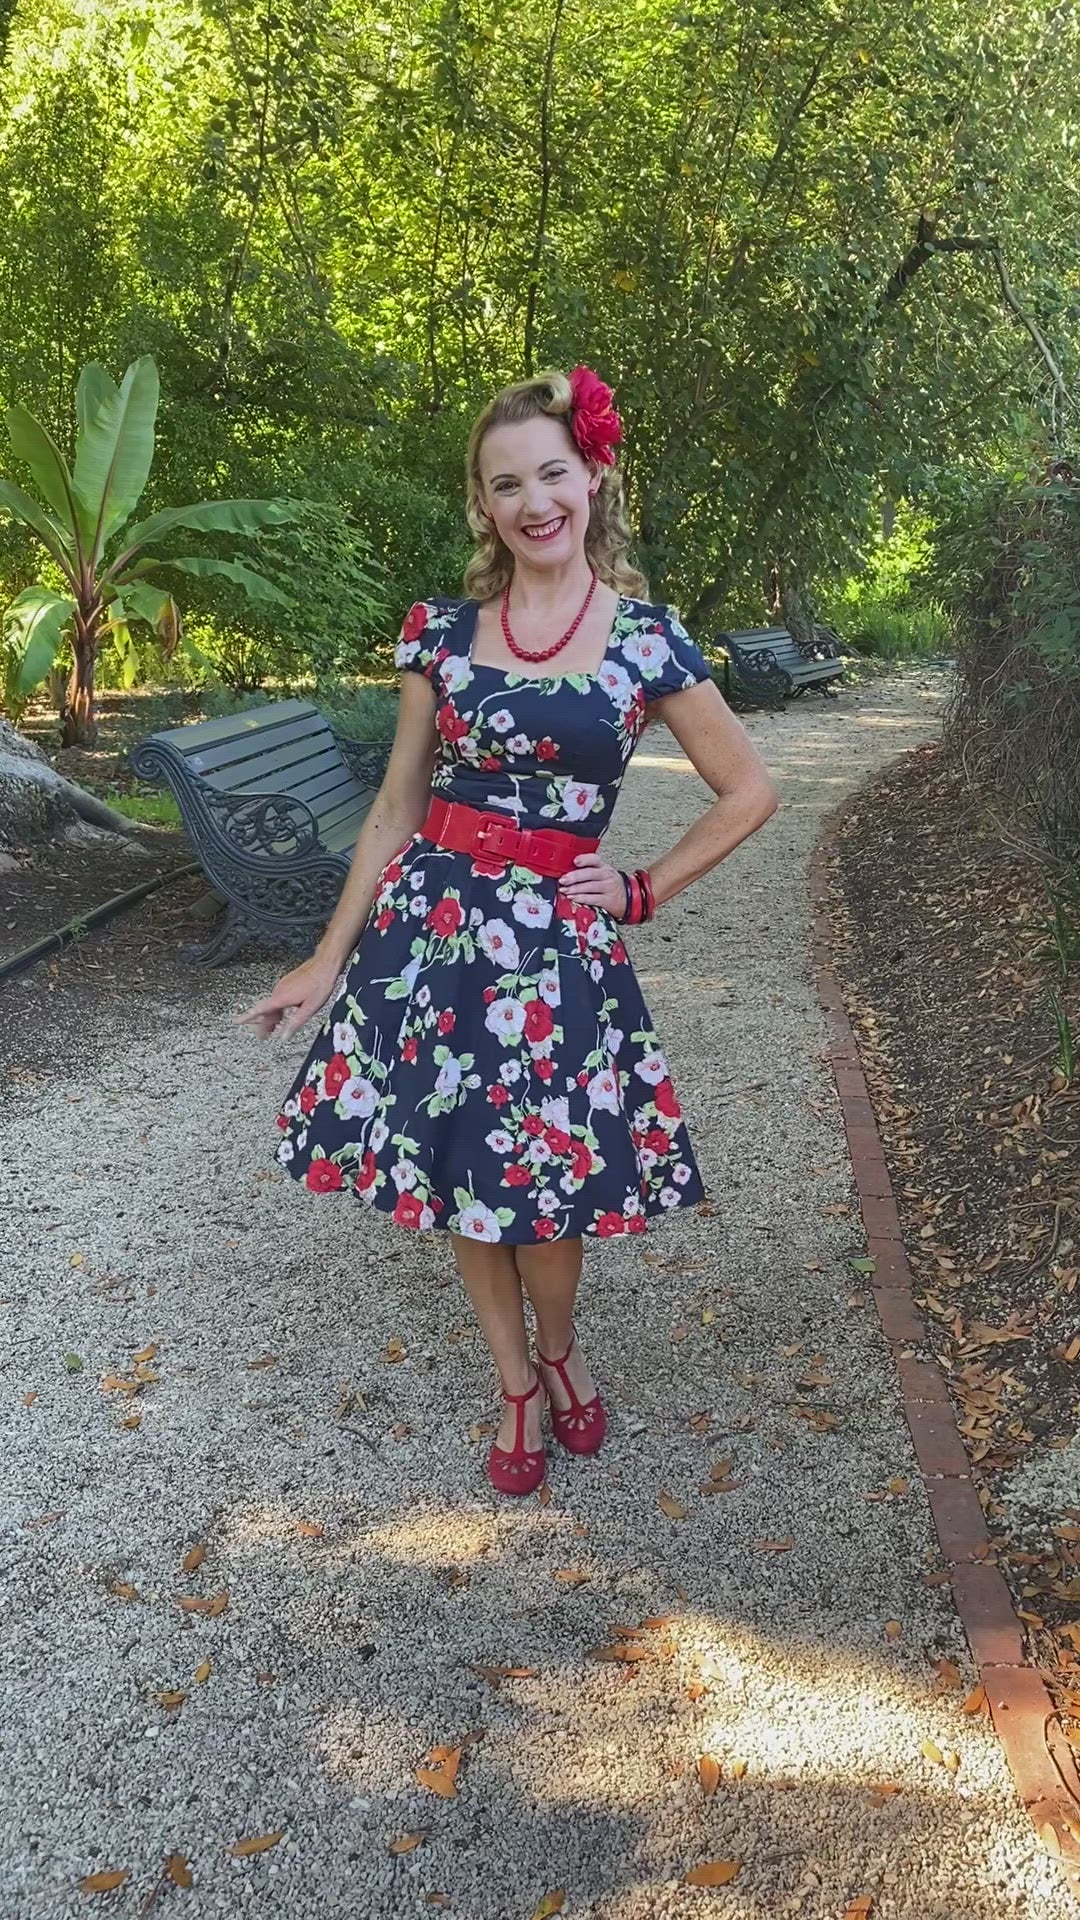 Video of a model posing playfully, wearing our Claudia Navy & White Red Floral Swing Dress.